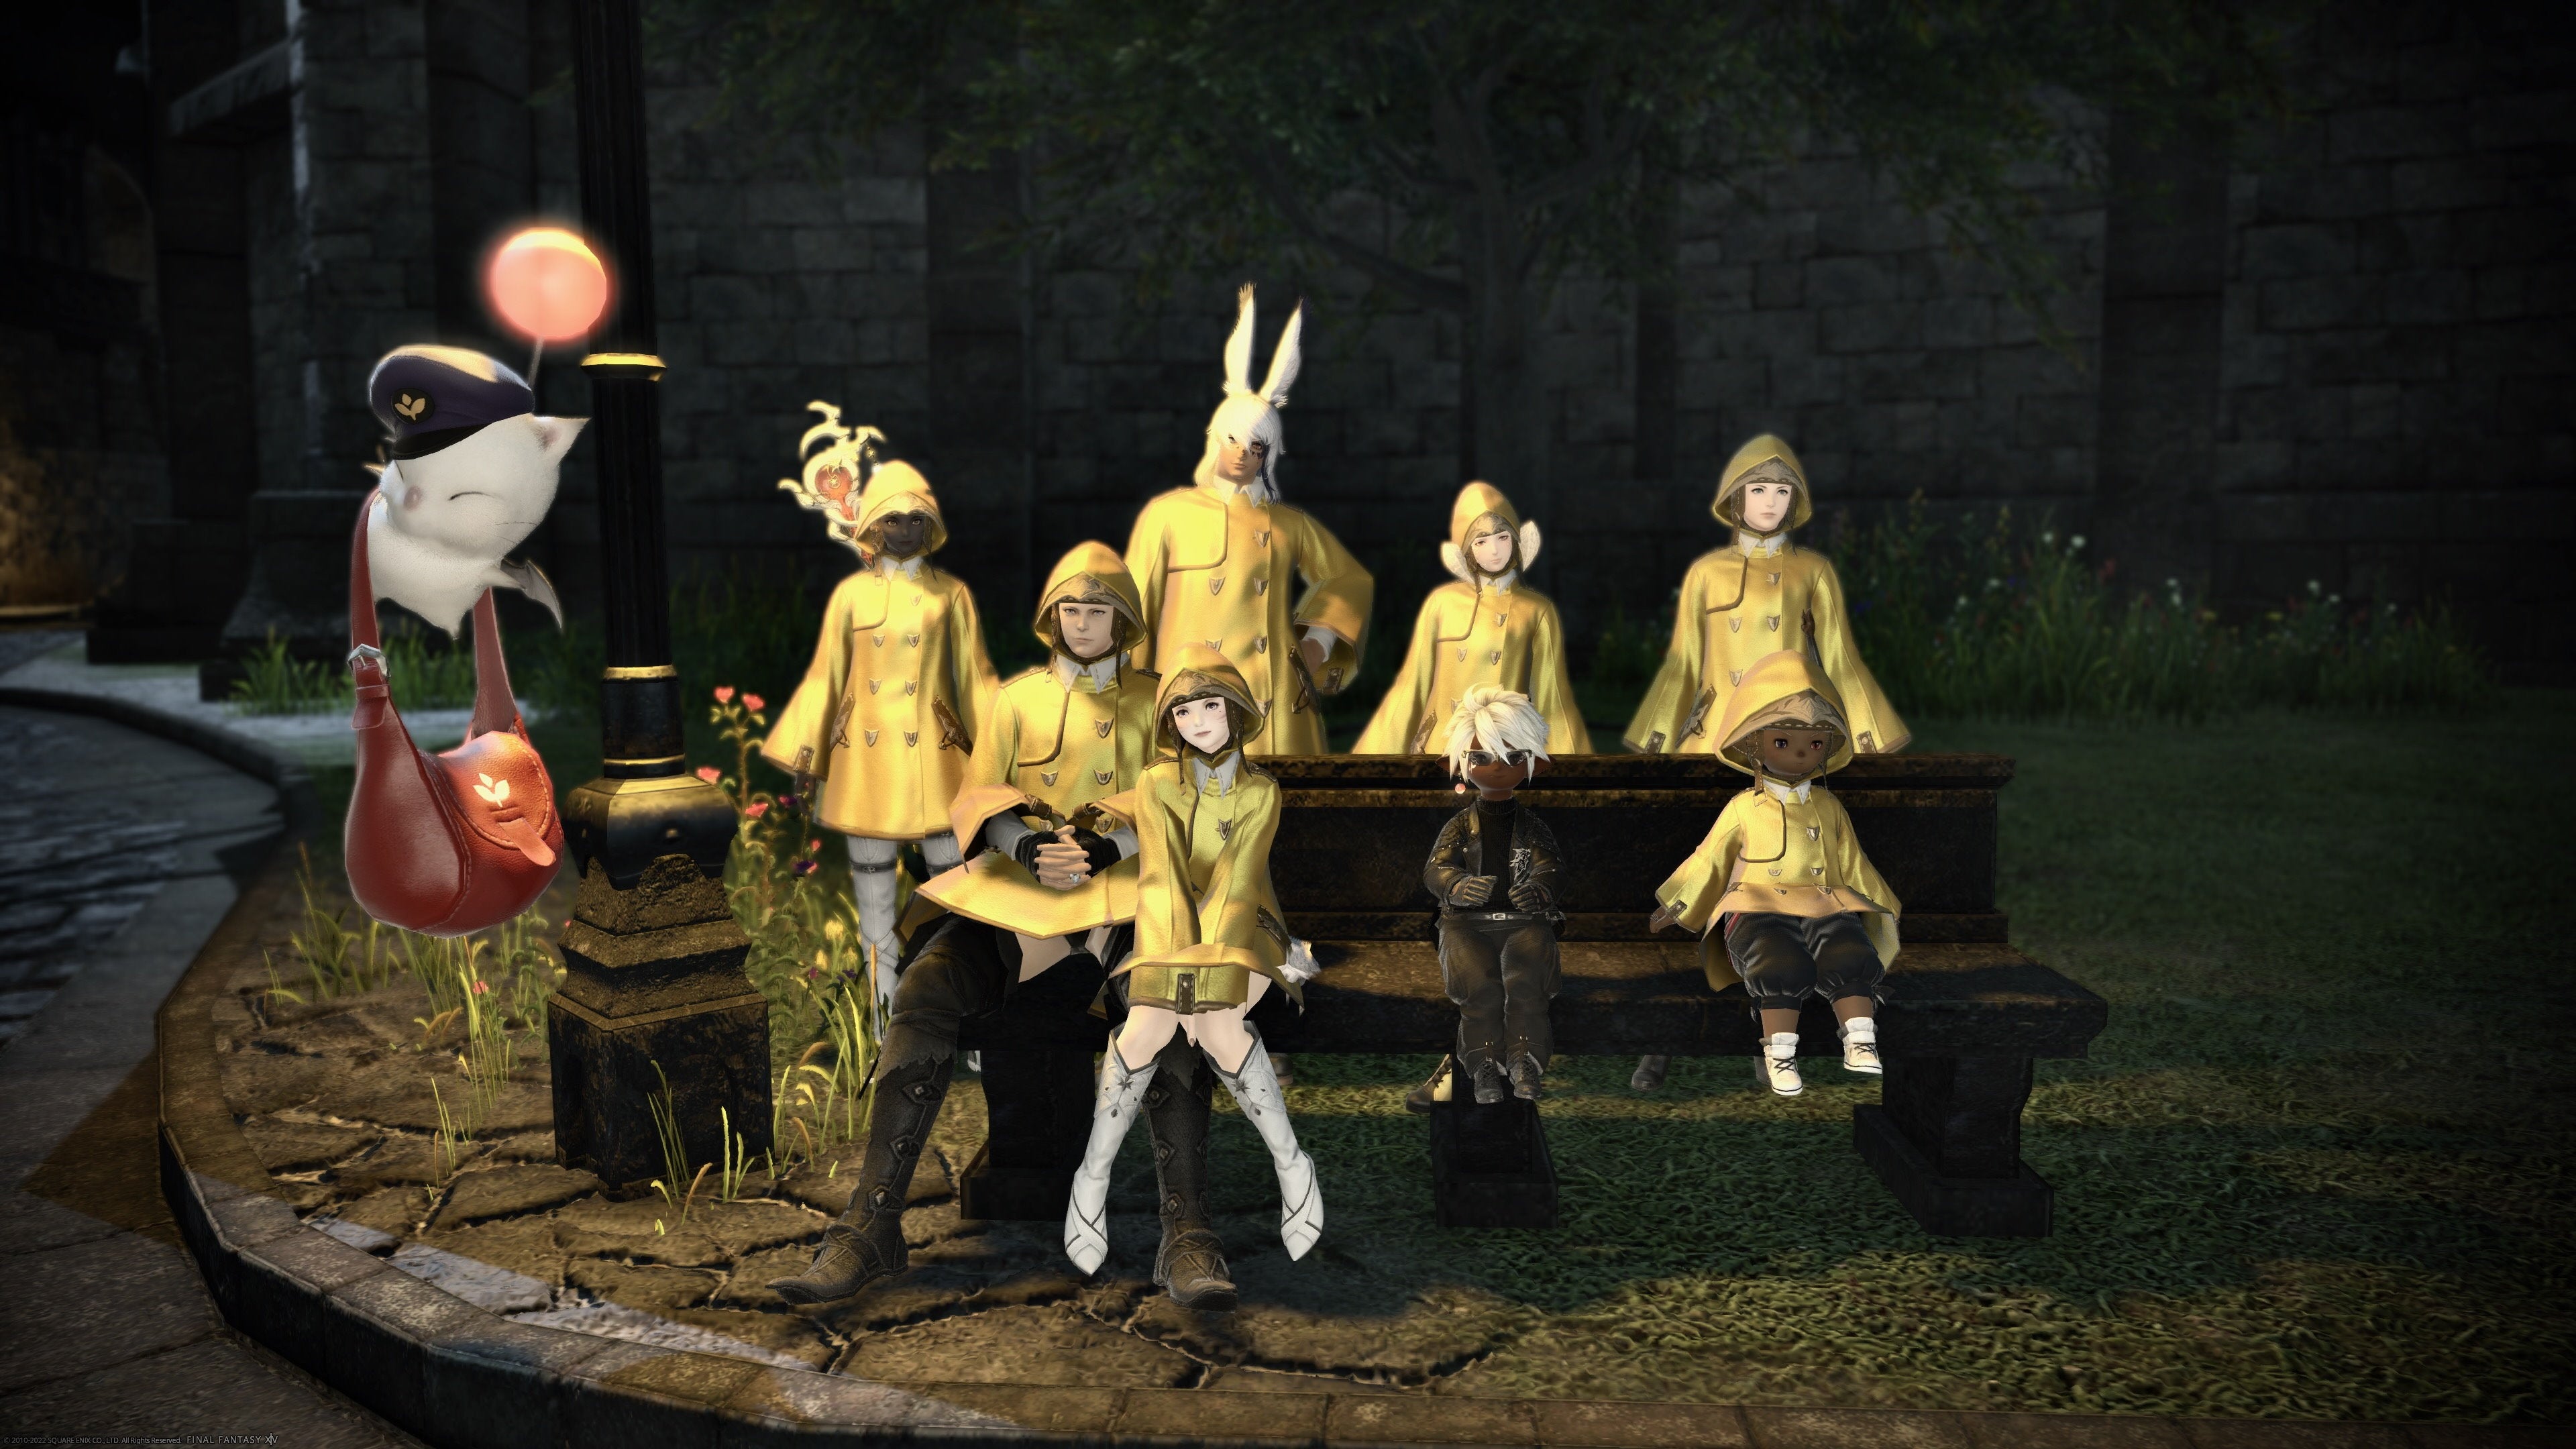 A group of Final Fantasy 14 characters wearing yellow rain coats sitting on a bench